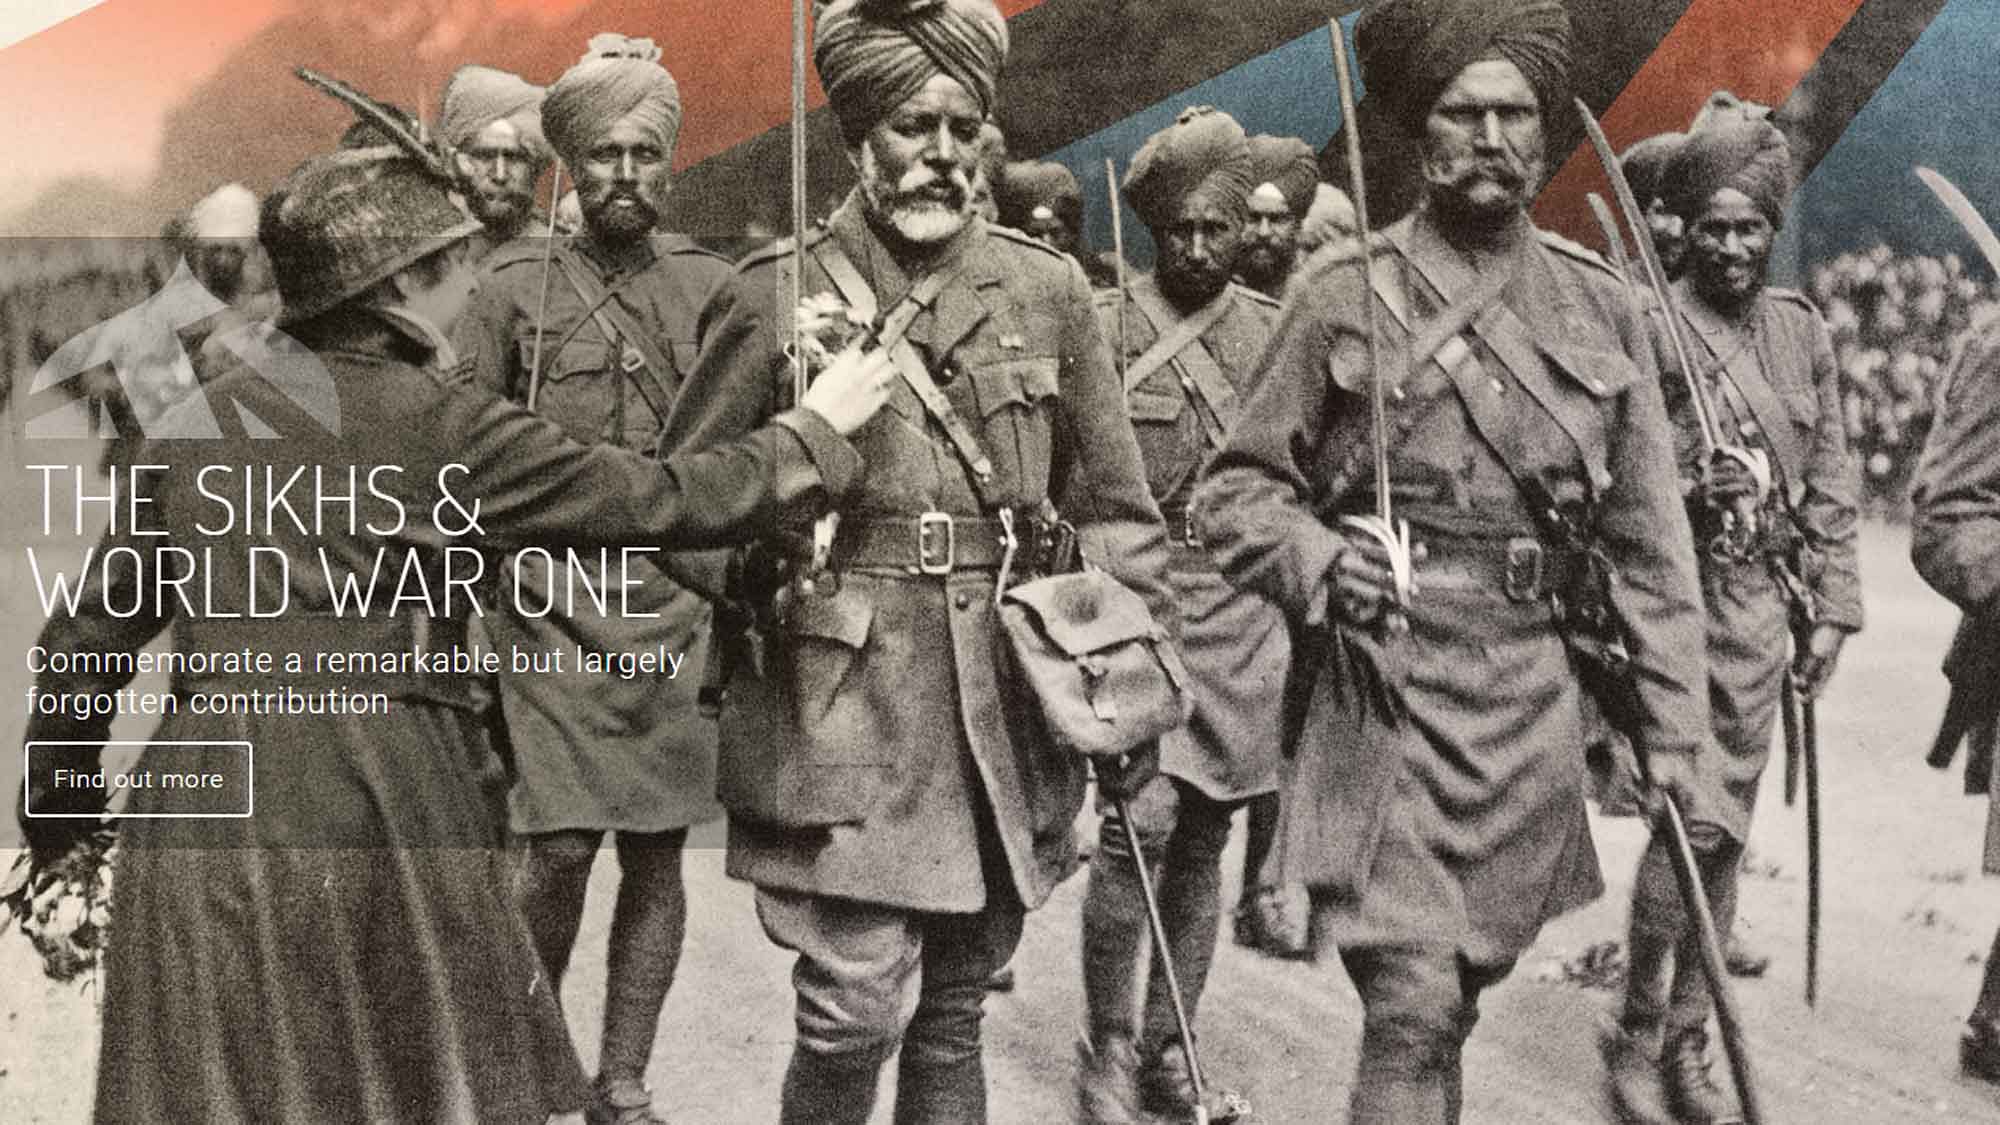 

Despite accounting for less than one percent of the population of India at that time, Sikhs made up nearly 20 percent of British Indian armed forces. (Screenshot Courtesy:  <i><a href="http://www.empirefaithwar.com/page-6">Empire, Faith &amp; War: The Sikhs and World War One</a>)</i>